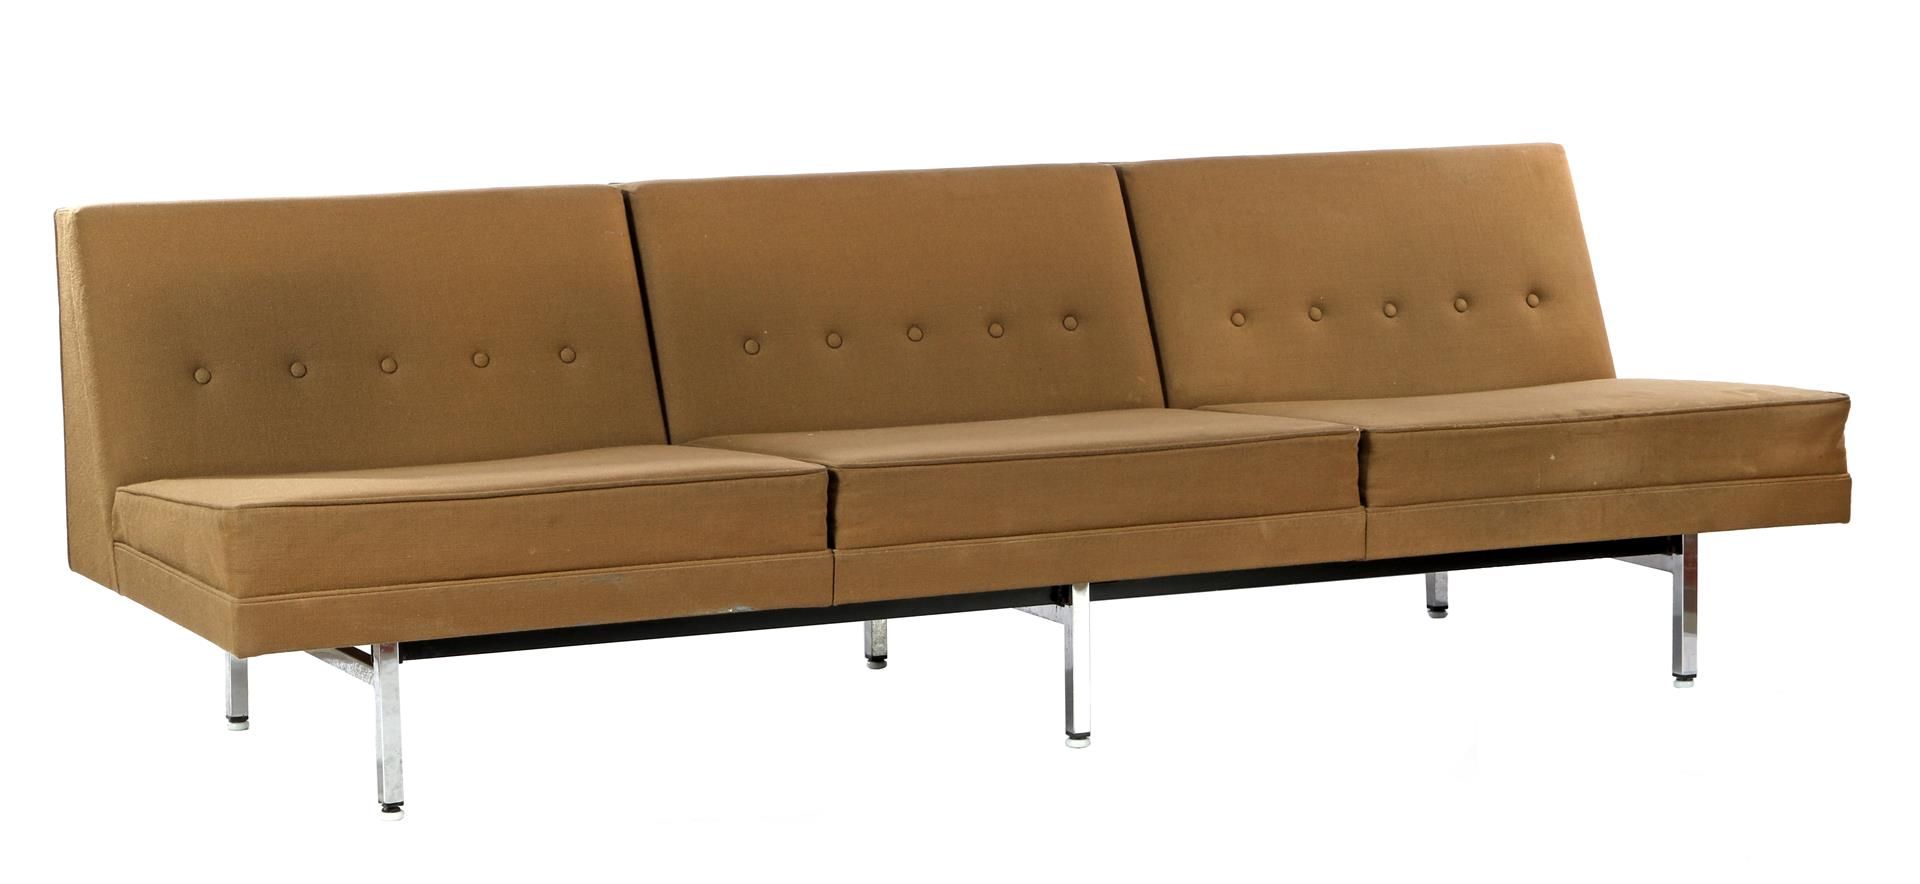 George Nelson (1908-1986) 3-seater army green upholstered sofa